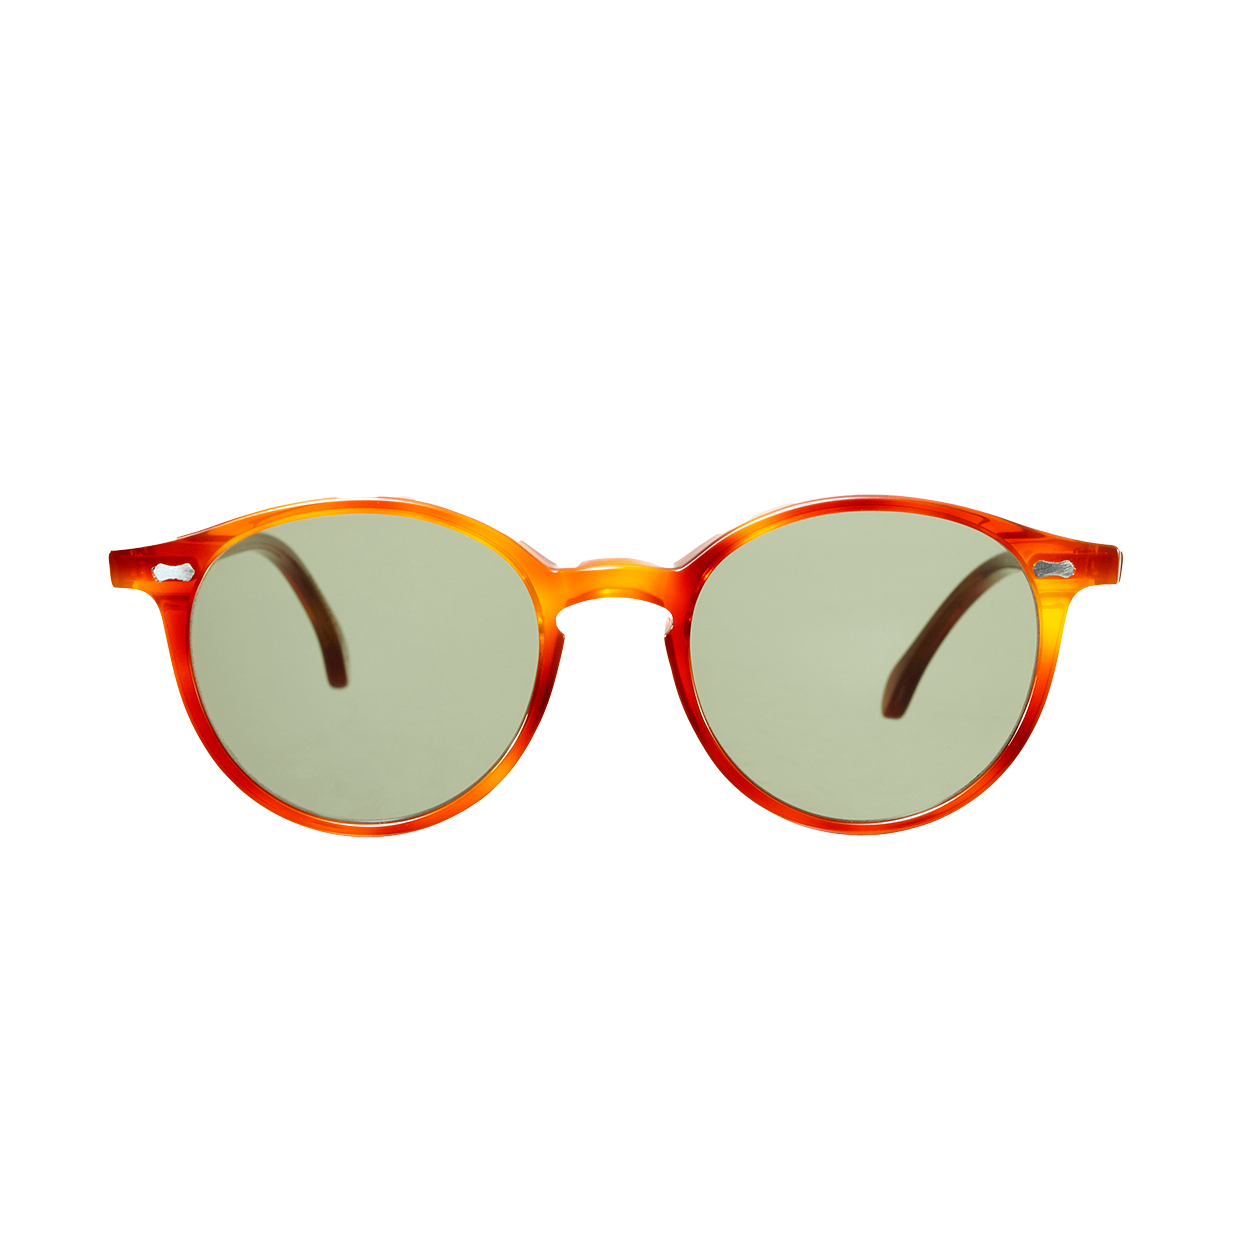 Handmade high-quality Cran Classic Tortoise sunglasses with an orange frame and green lenses from The Bespoke Dudes.